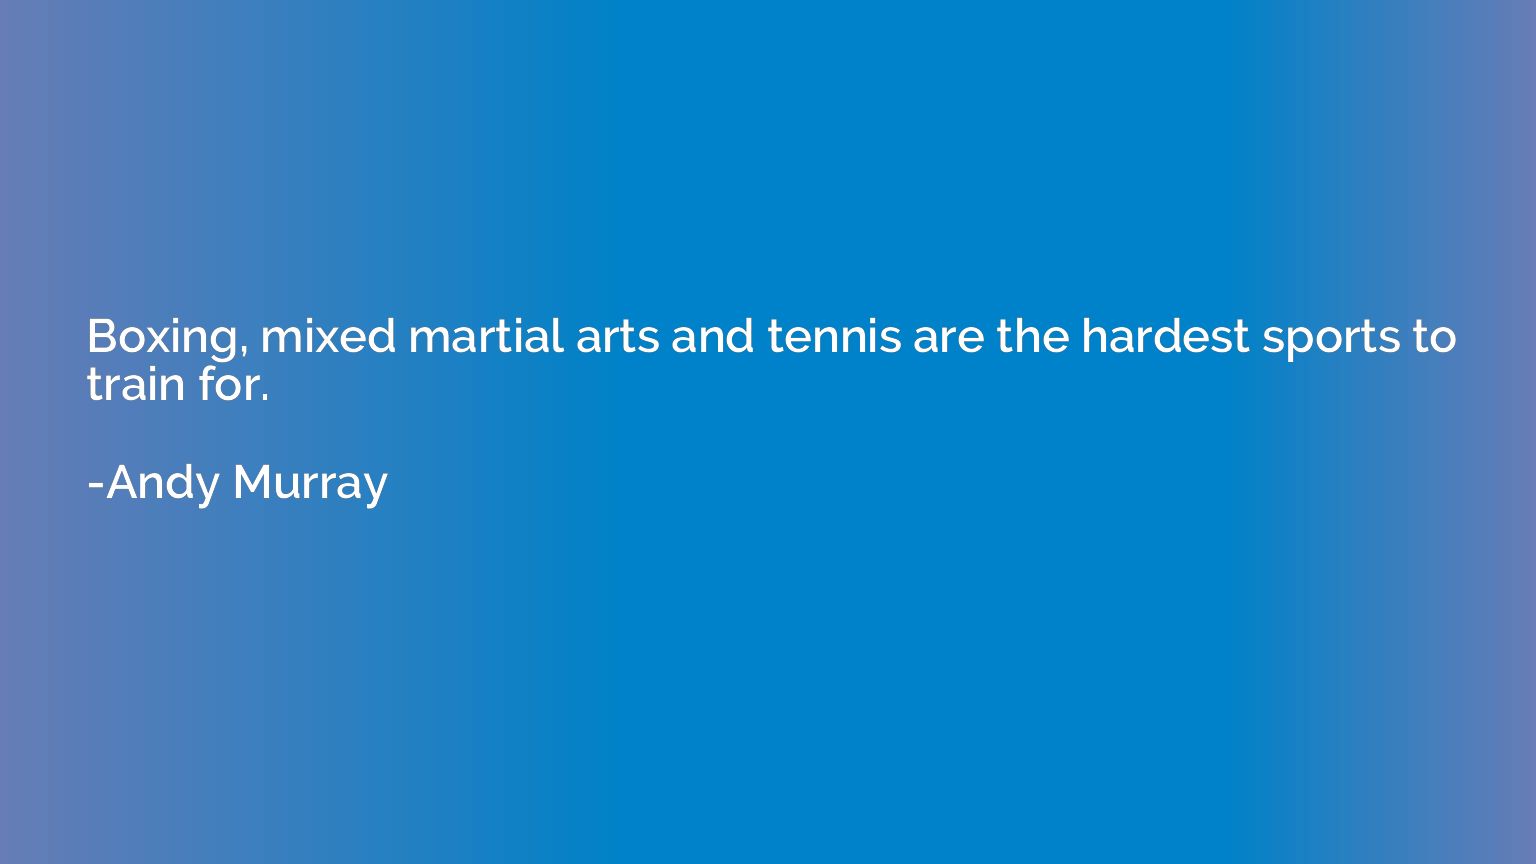 Boxing, mixed martial arts and tennis are the hardest sports